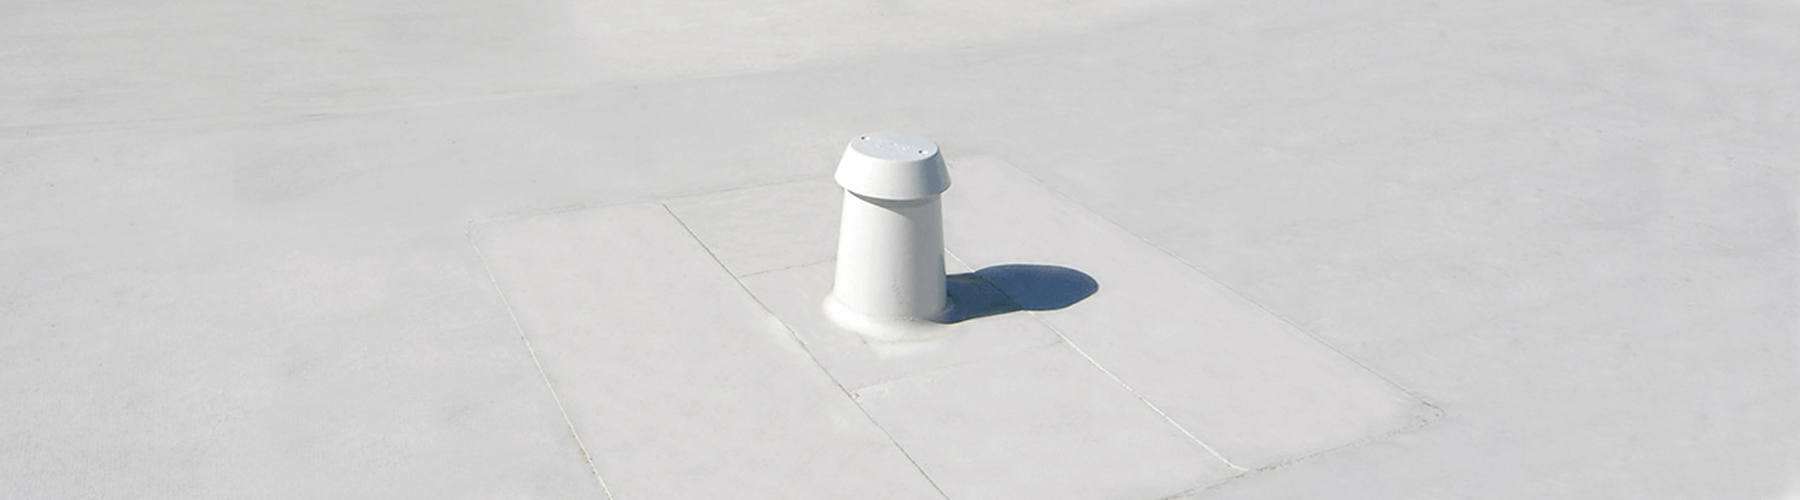 Two-Way Roof Air Vent